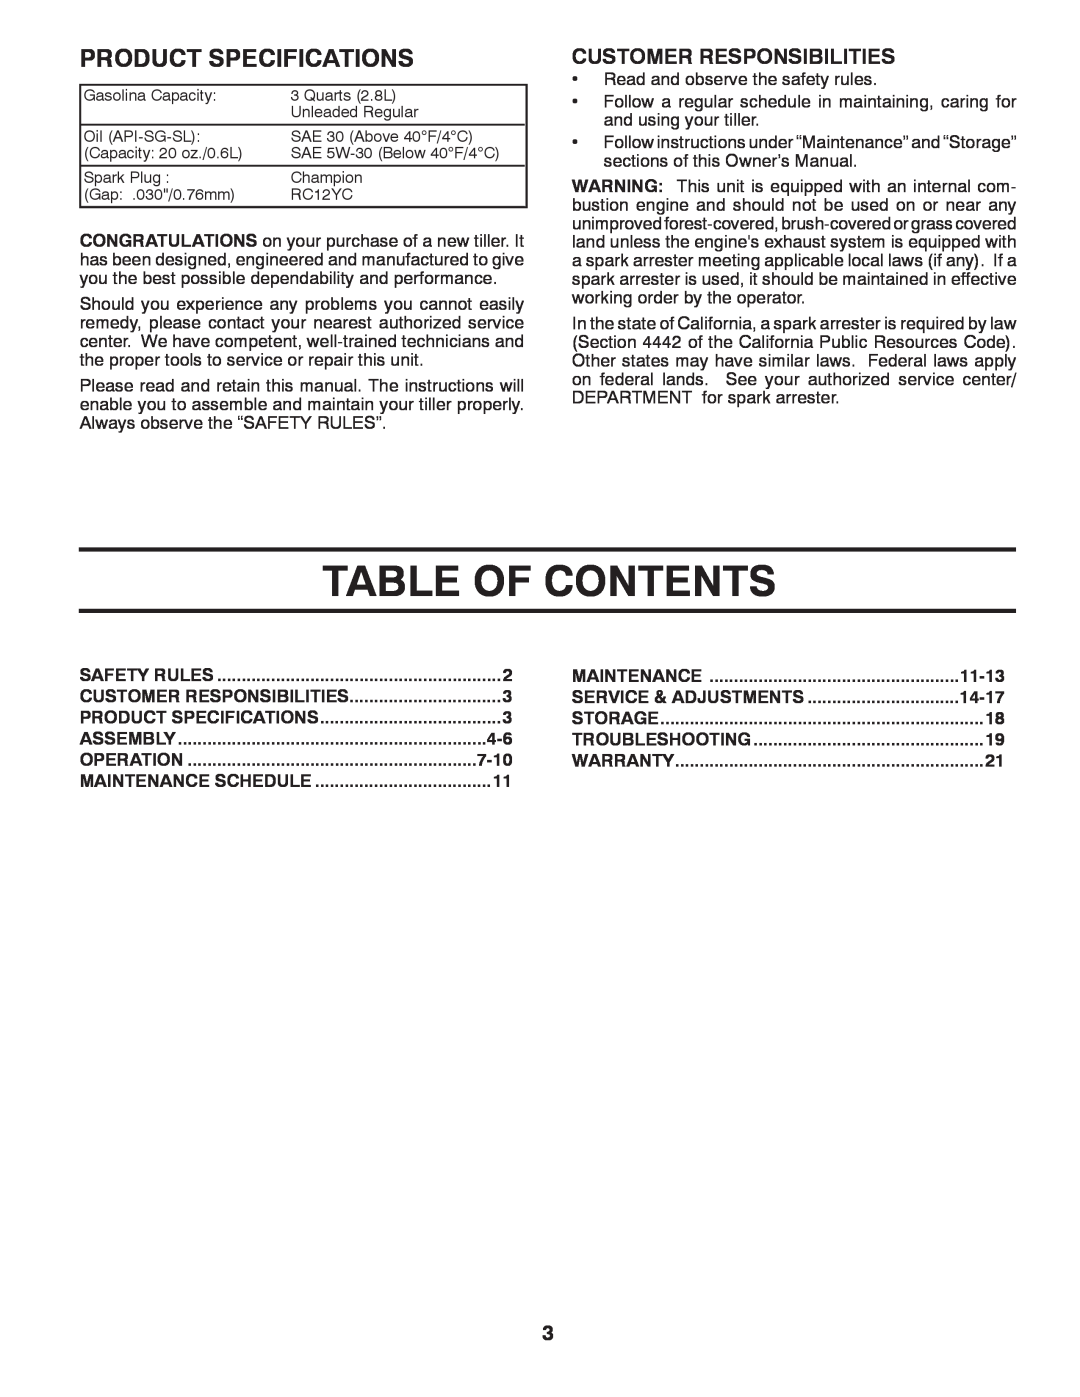 Poulan 96092001300, 417150 manual Table Of Contents, Product Specifications, Customer Responsibilities 